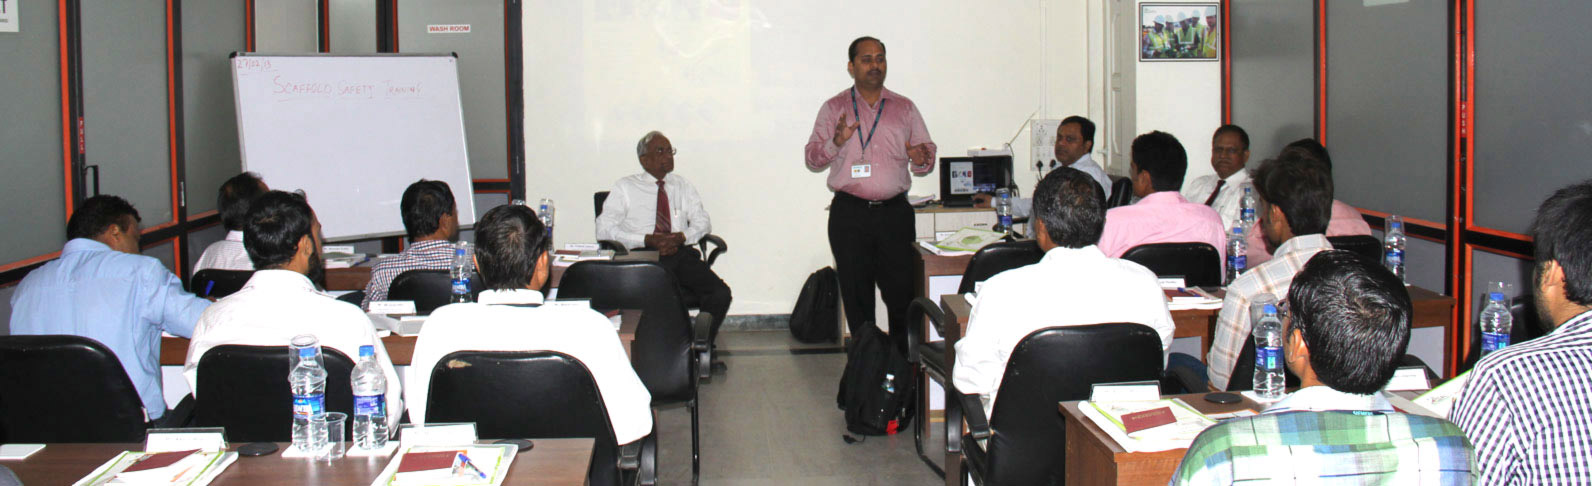 Conducting classroom scaffolding training in ASK-EHS headquarter India